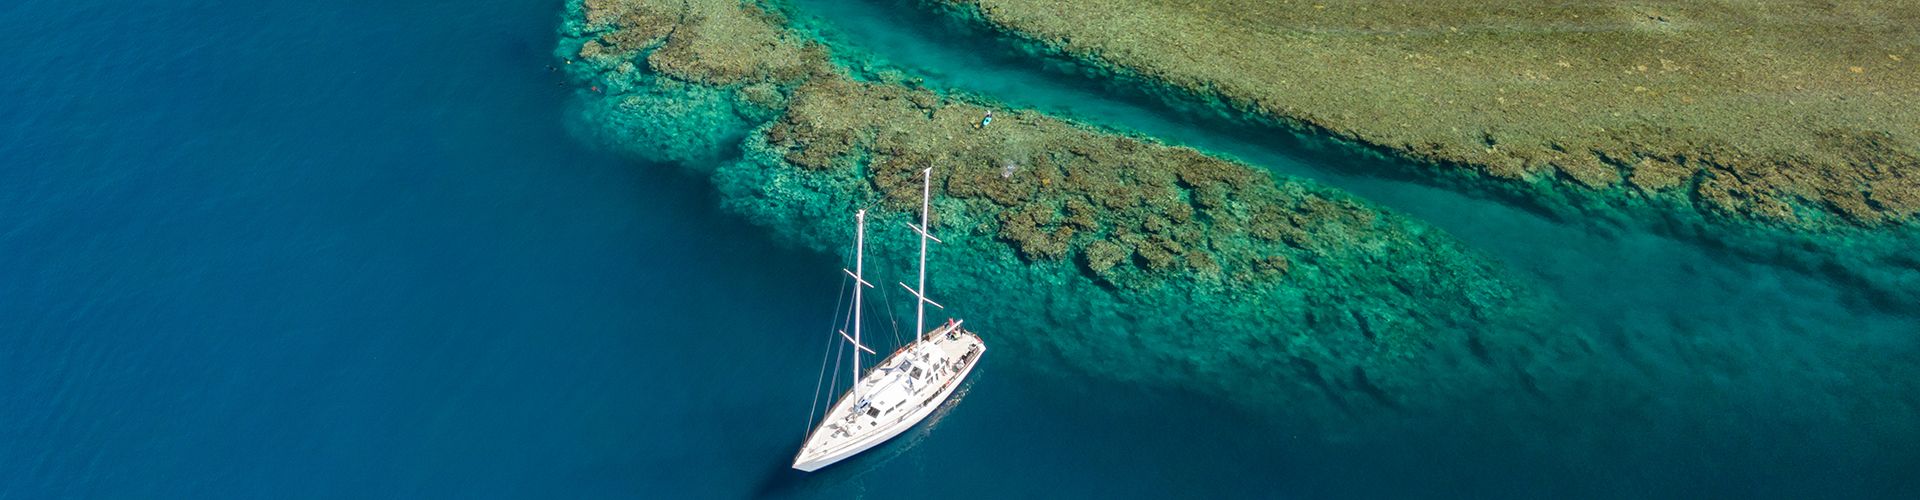 Outer Great Barrier Reef - Sailing Whitsunday Image